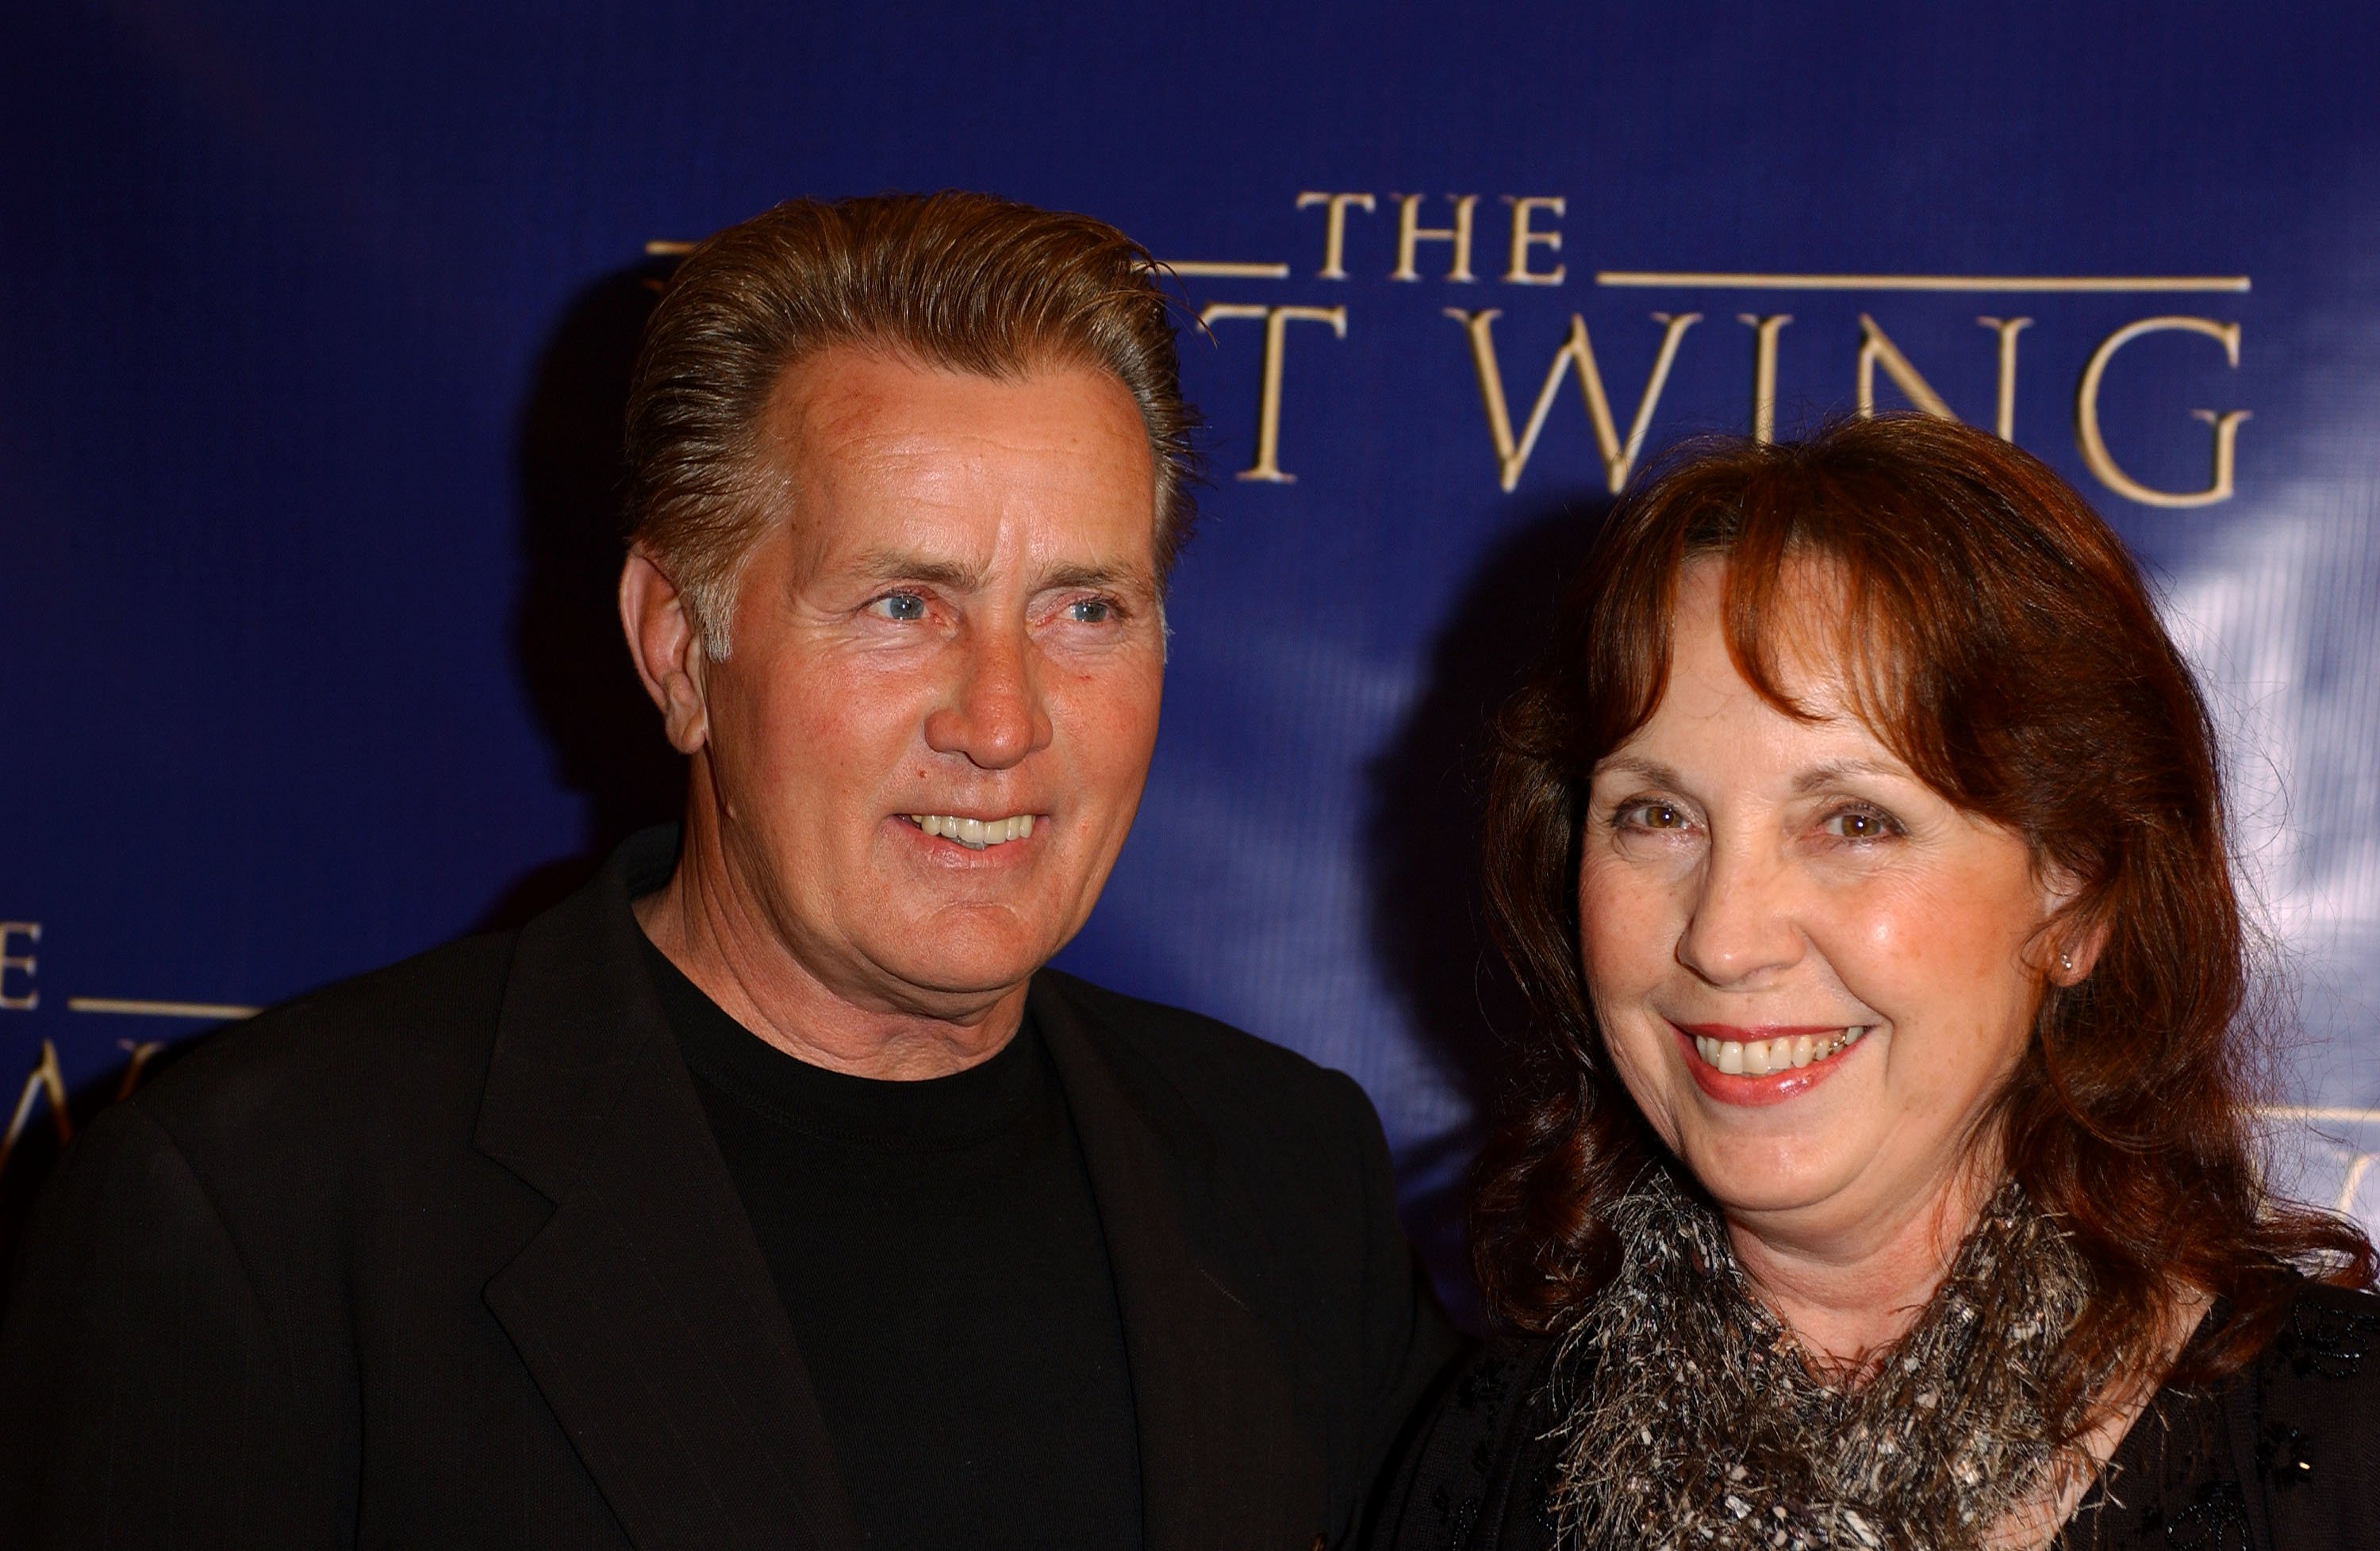 Martin Sheen and his wife Janet Sheen arriving at "The West Wing" 100th Episode celebration at The Four Seasons Hotel on November 1, 2003 in Beverly Hills, California. / Source: Getty Images